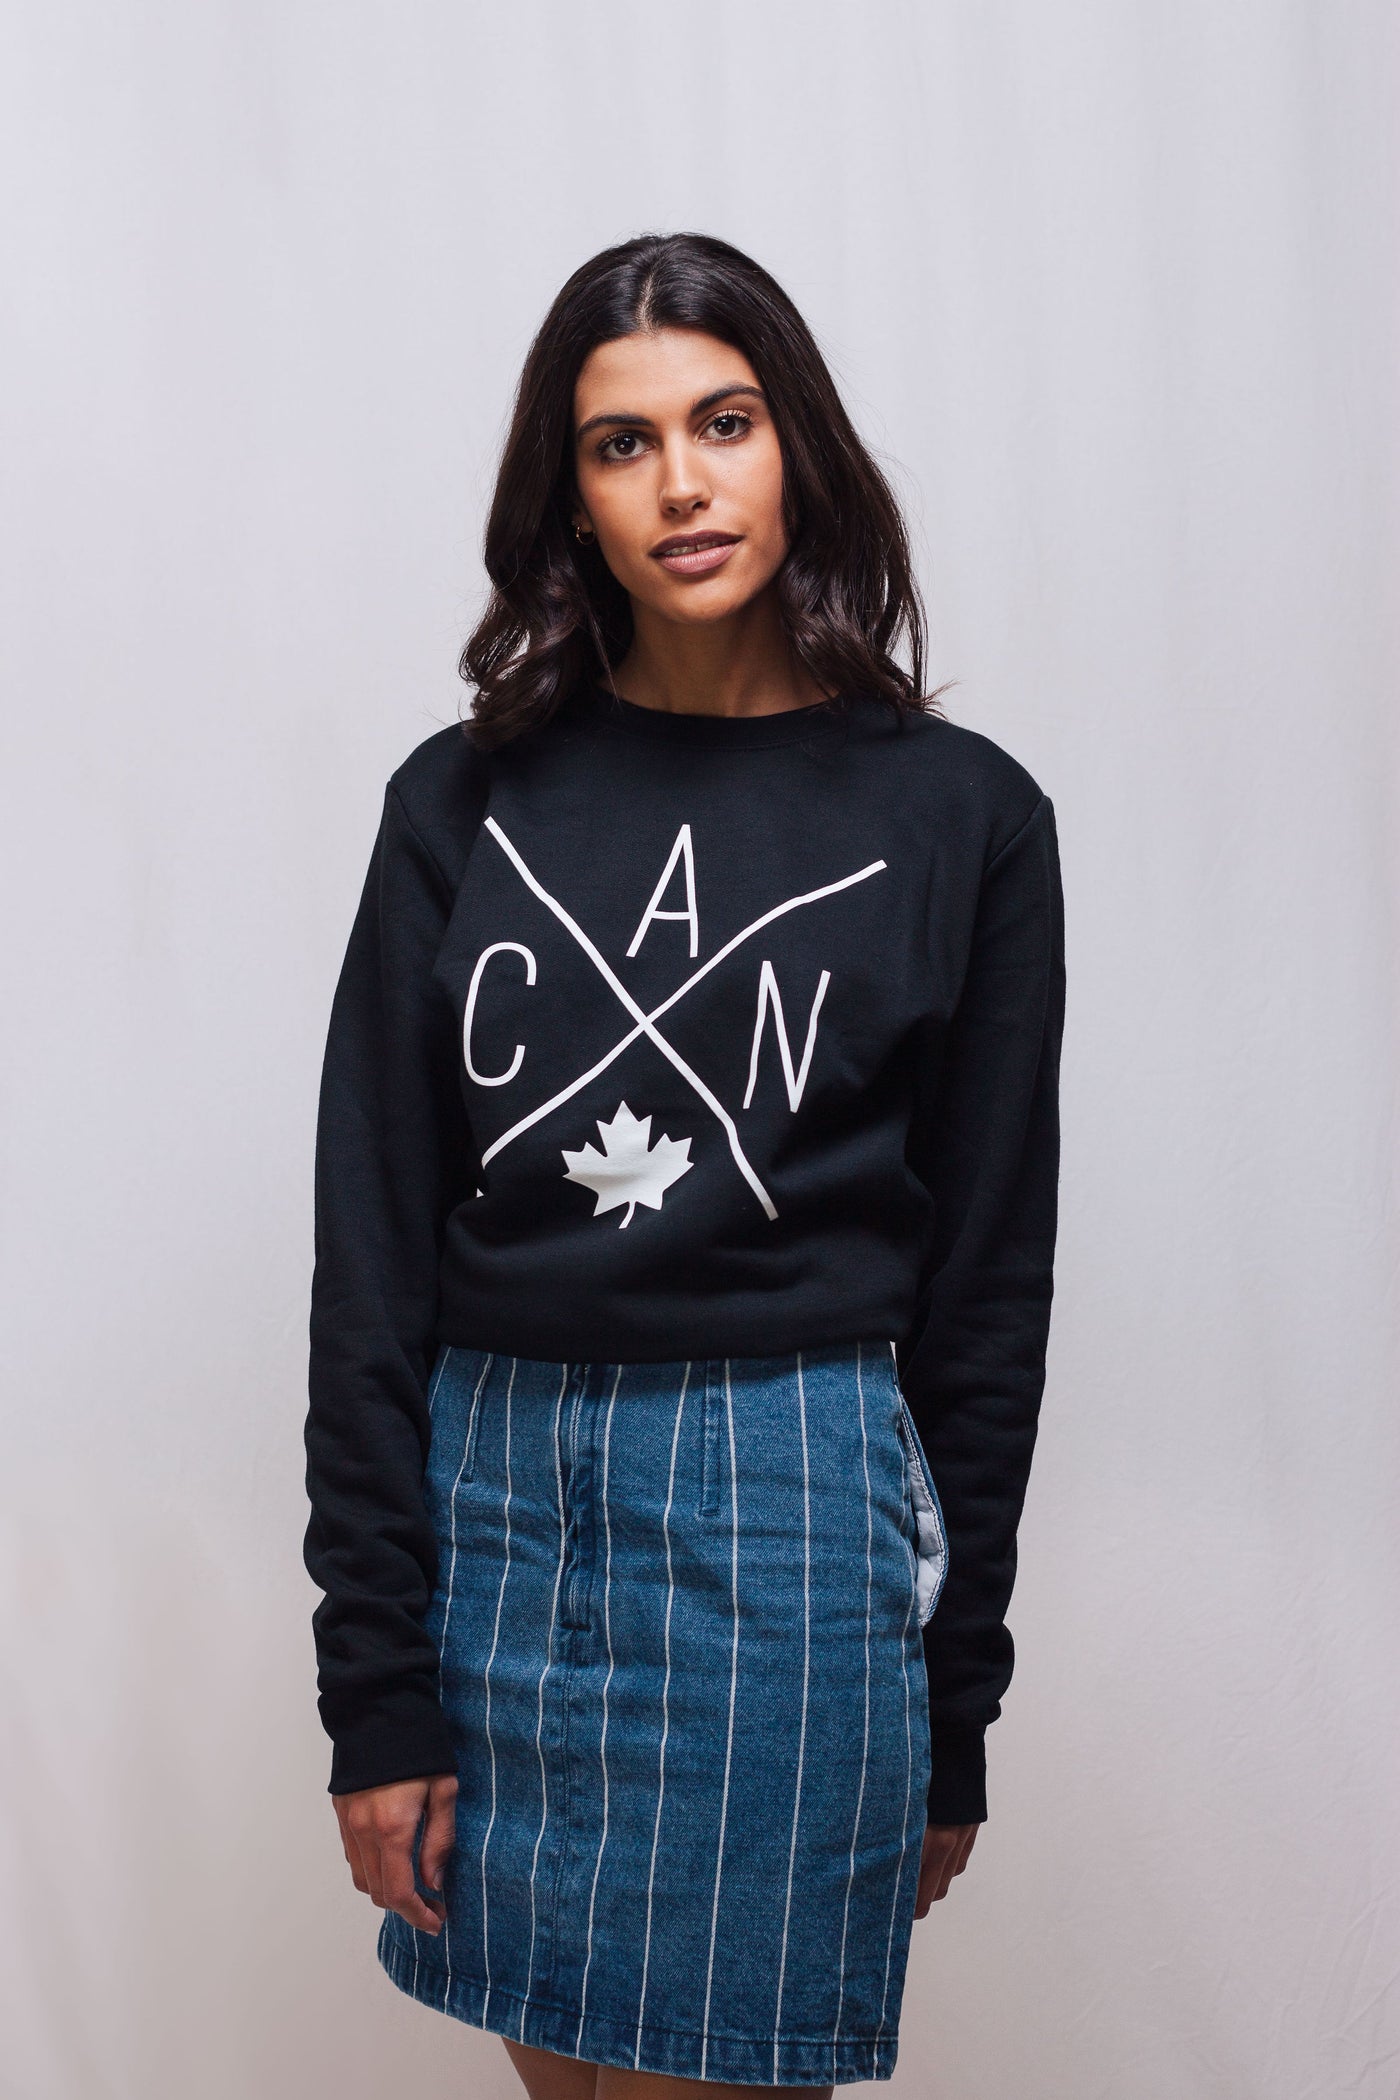 Individual wearing Made in Canada sweater, featuring a Local Laundry exclusive eye catching CAN design featuring a maple leaf. 